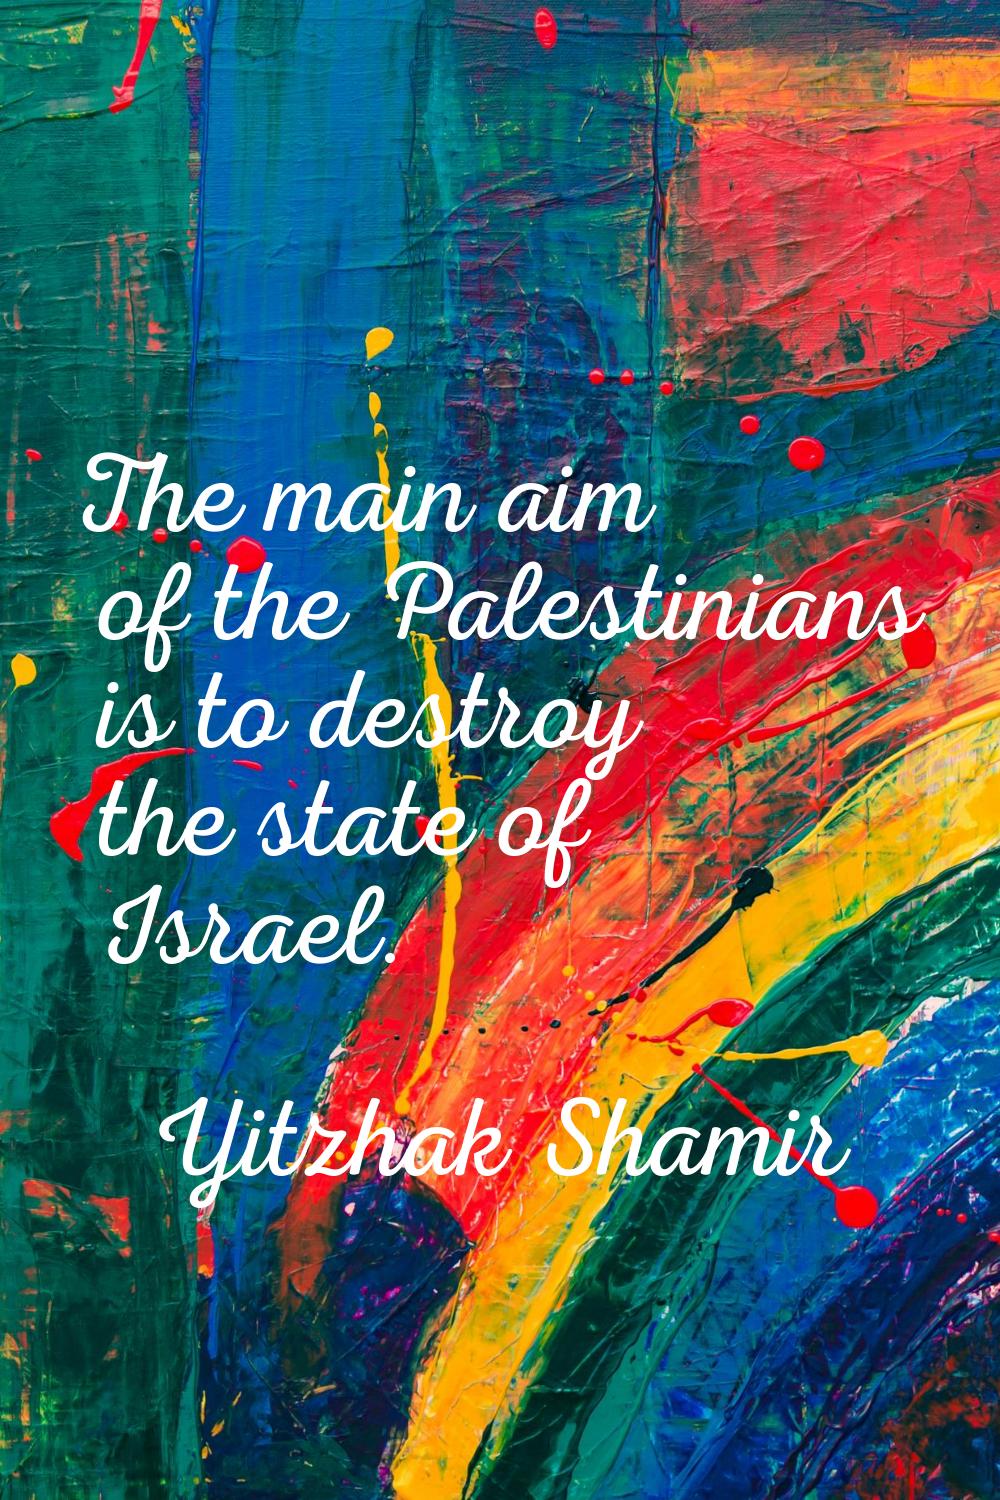 The main aim of the Palestinians is to destroy the state of Israel.